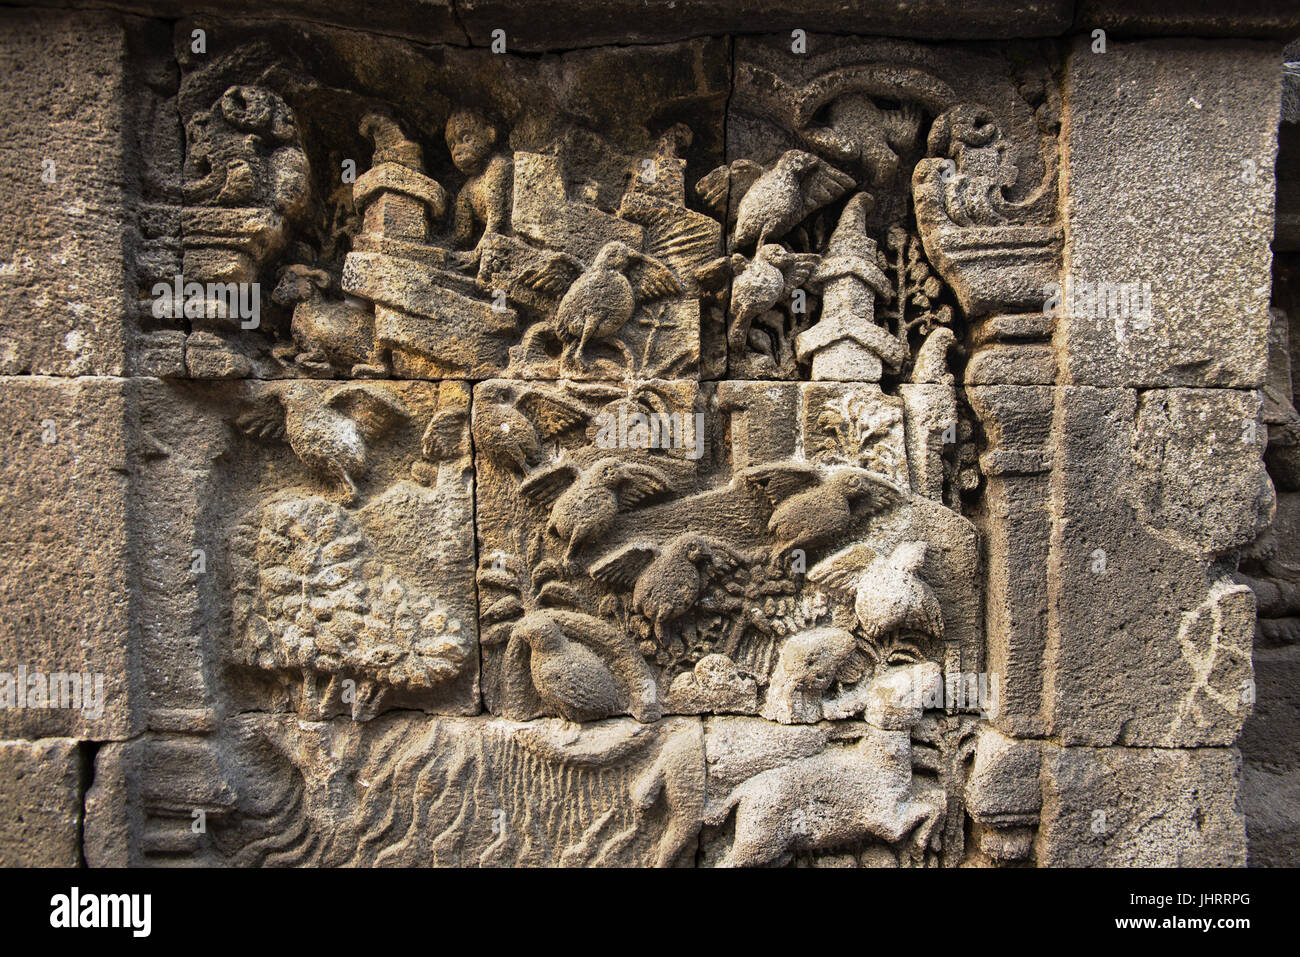 and Alamy hi-res gallery photography relief Borobudur - images stock